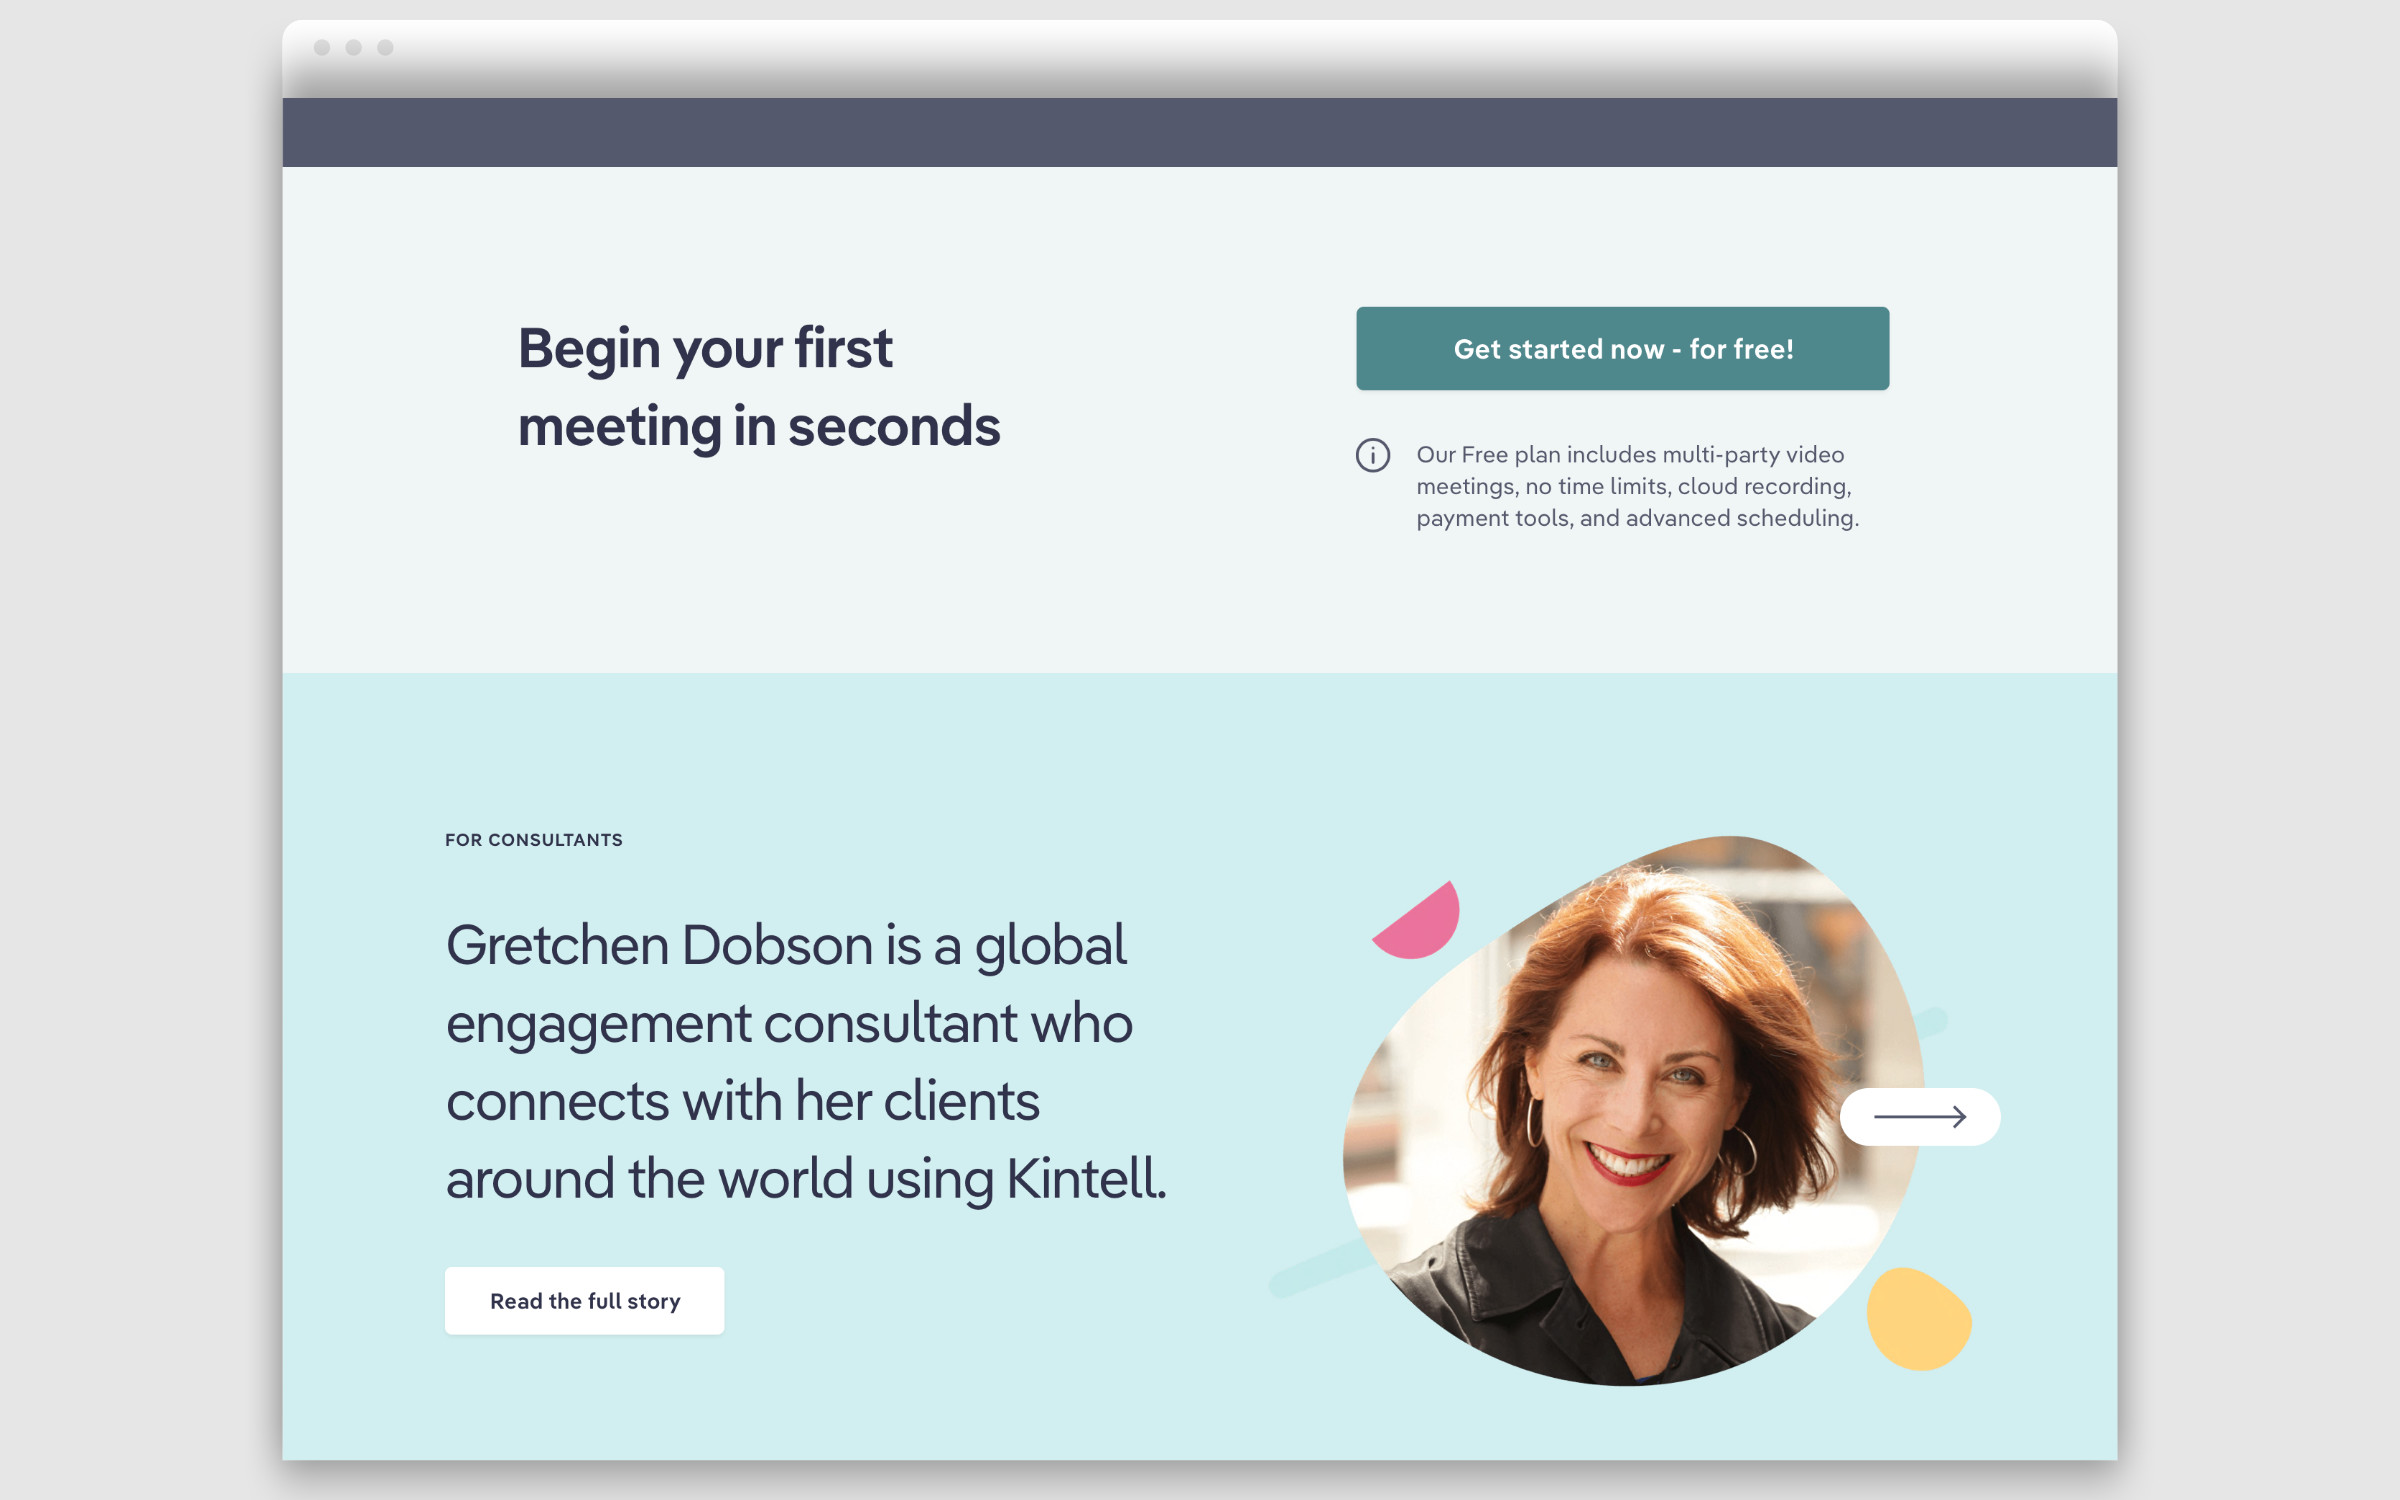 Pangea Text in use on Kintell’s website and user interface